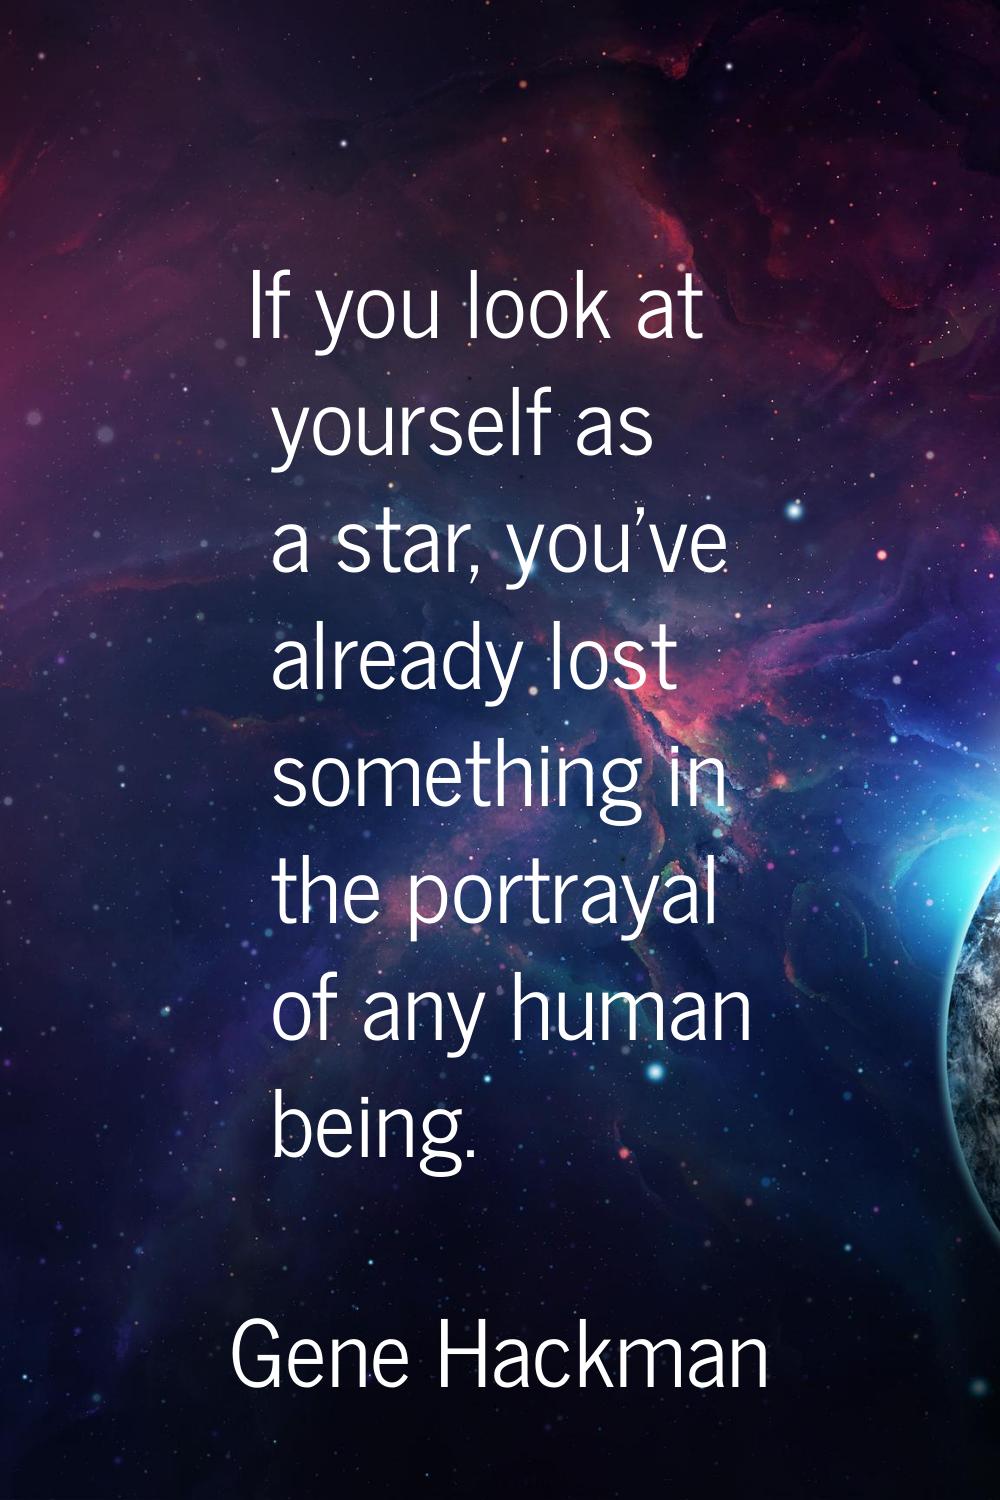 If you look at yourself as a star, you've already lost something in the portrayal of any human bein